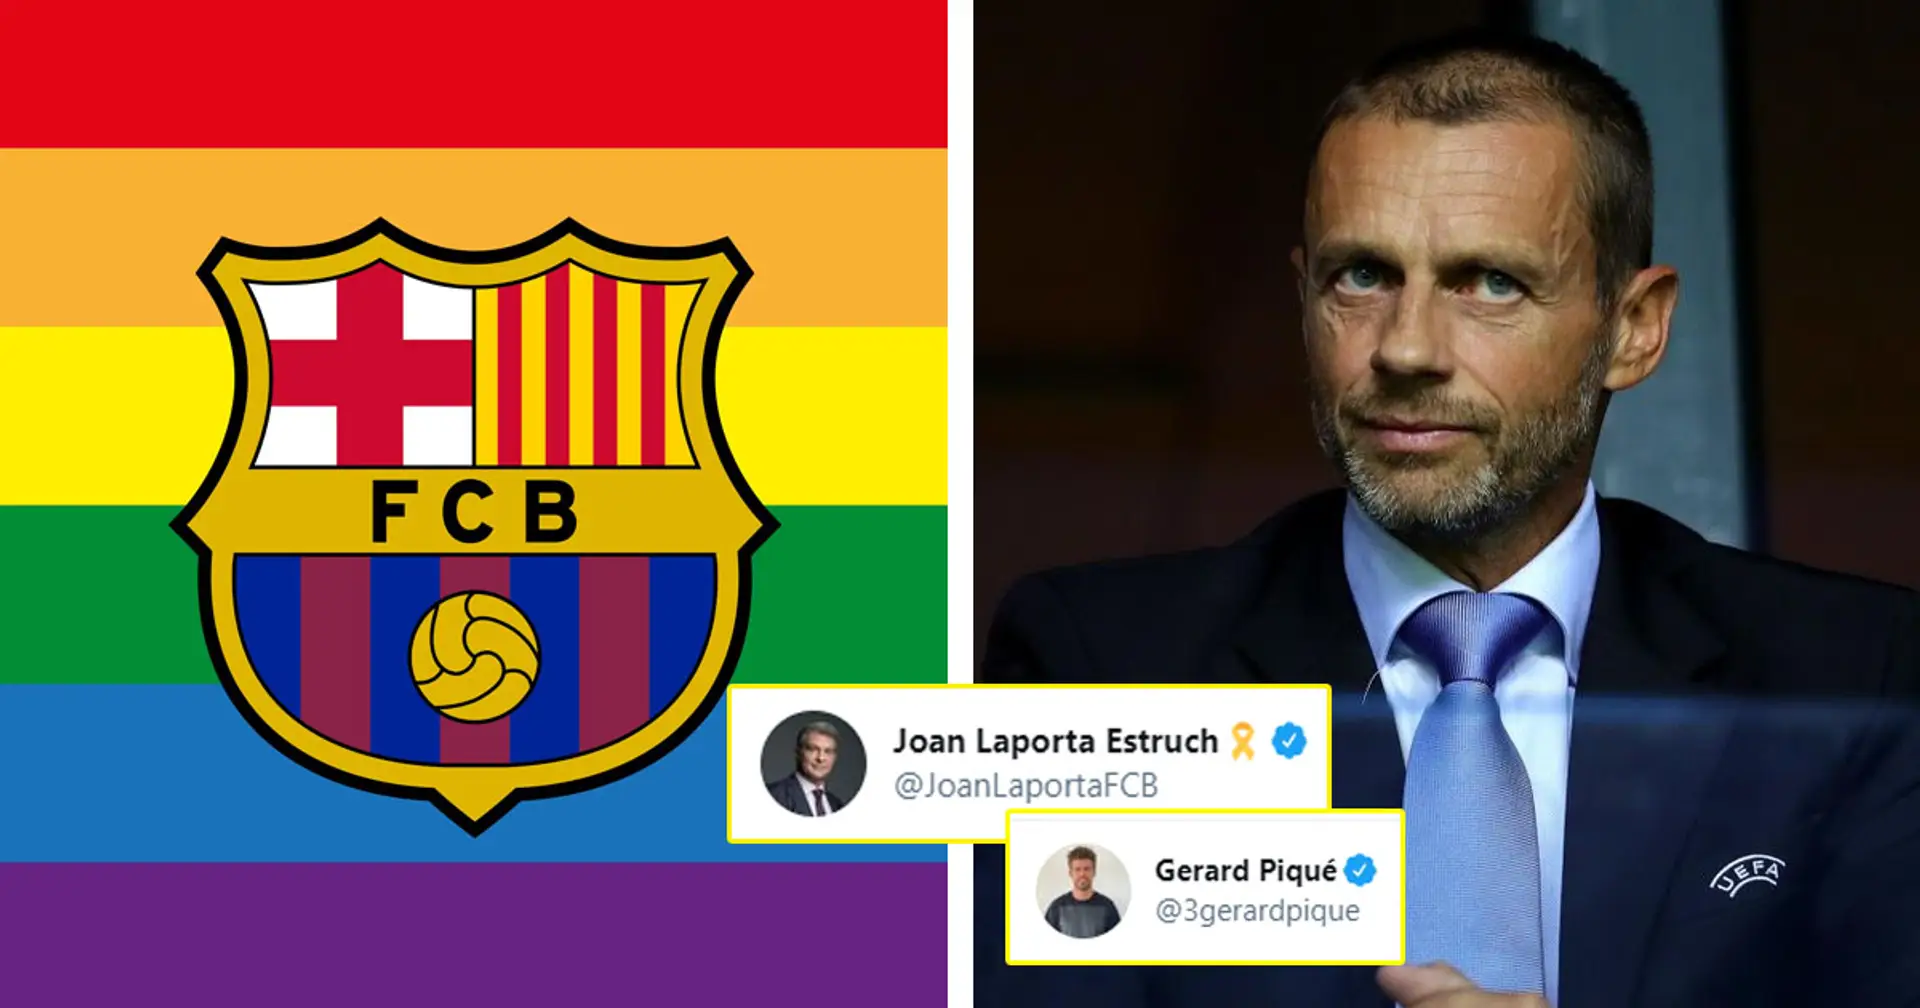 Barca post picture in support of LGBTQ+ after UEFA refuse to light up stadium in rainbow colours, Pique and Laporta join in